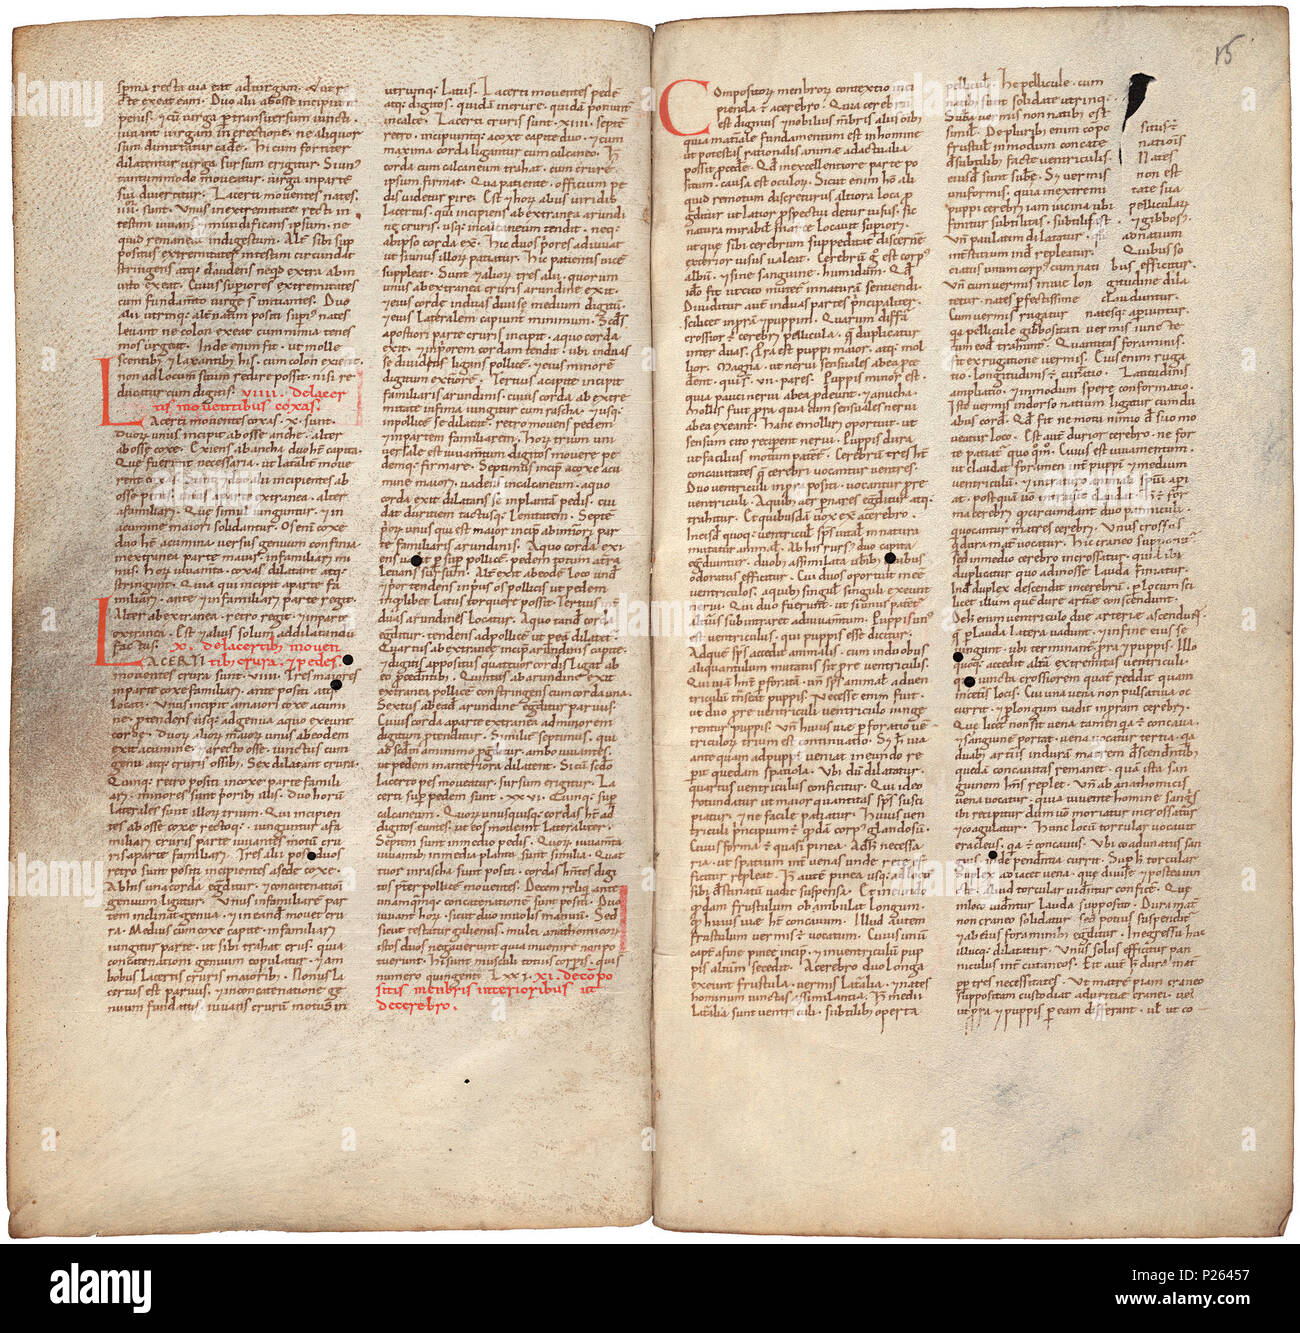 . Pantegni pars prima theorica (lib. I-X) - folios 014v (left) and 015r (right)  .  Lefthand side folio 014v; righthand side folio 015r from an 11th century copy of the Liber pantegni. This is the earliest known copy (prior to 1086) of the Liber pantegni, made at Monte Cassino under the supervision of Constantine the African. It is dedicated to Abbot Desiderius of Monte Cassino (1027-1087), before he became Pope Victor III. Read backgroud information in Dutch and in English. . Constantine the African (ca. 1010-1098/9) 175 Liber pantegni - KB 73 J 6 - folios 014v (left) and 015r (right) Stock Photo